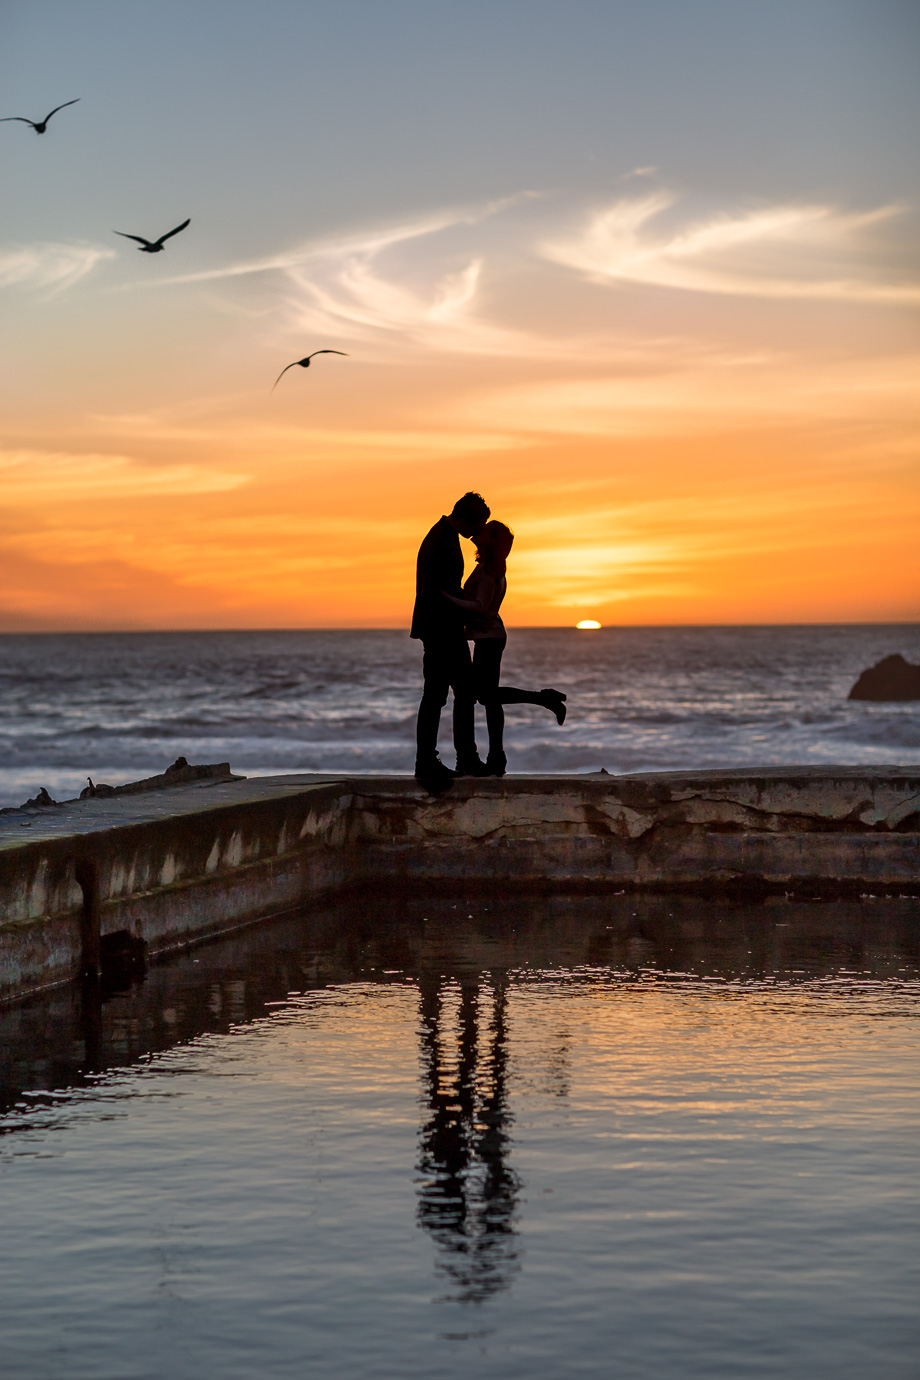 San Francisco sutro baths sunset silhouette engagement photo with seagulls